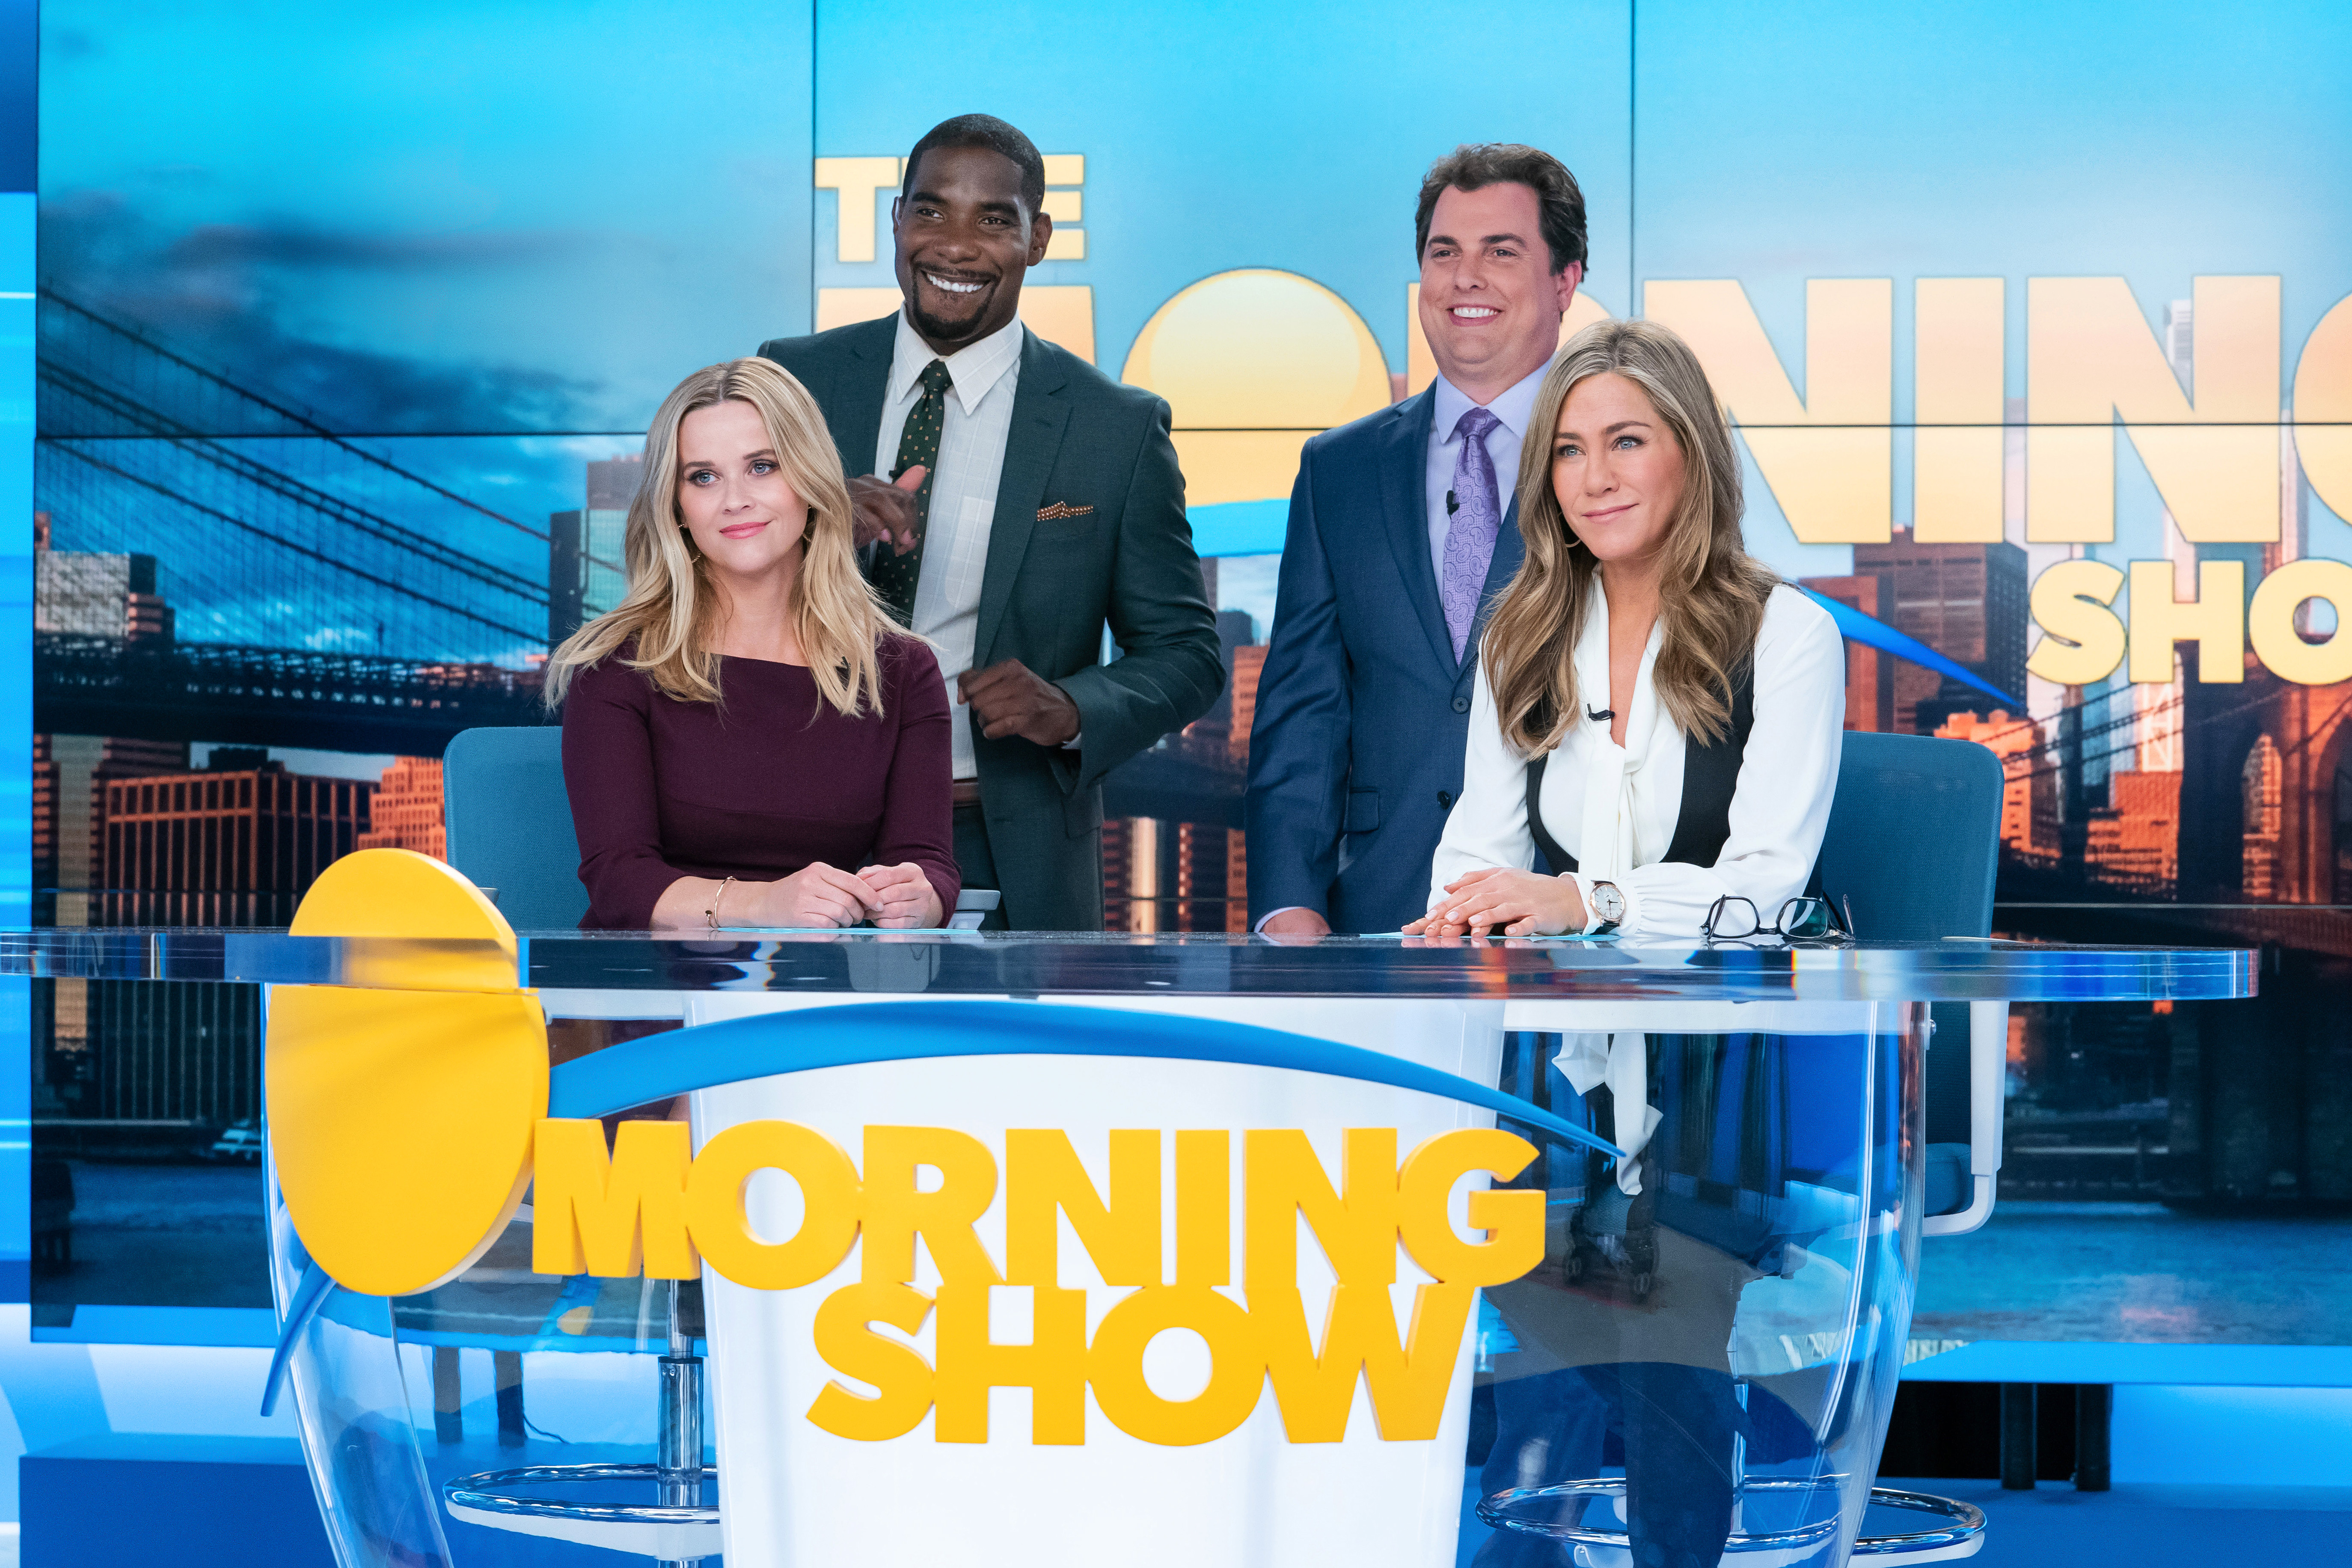 The Morning Show' Season 3: Everything We Know So Far